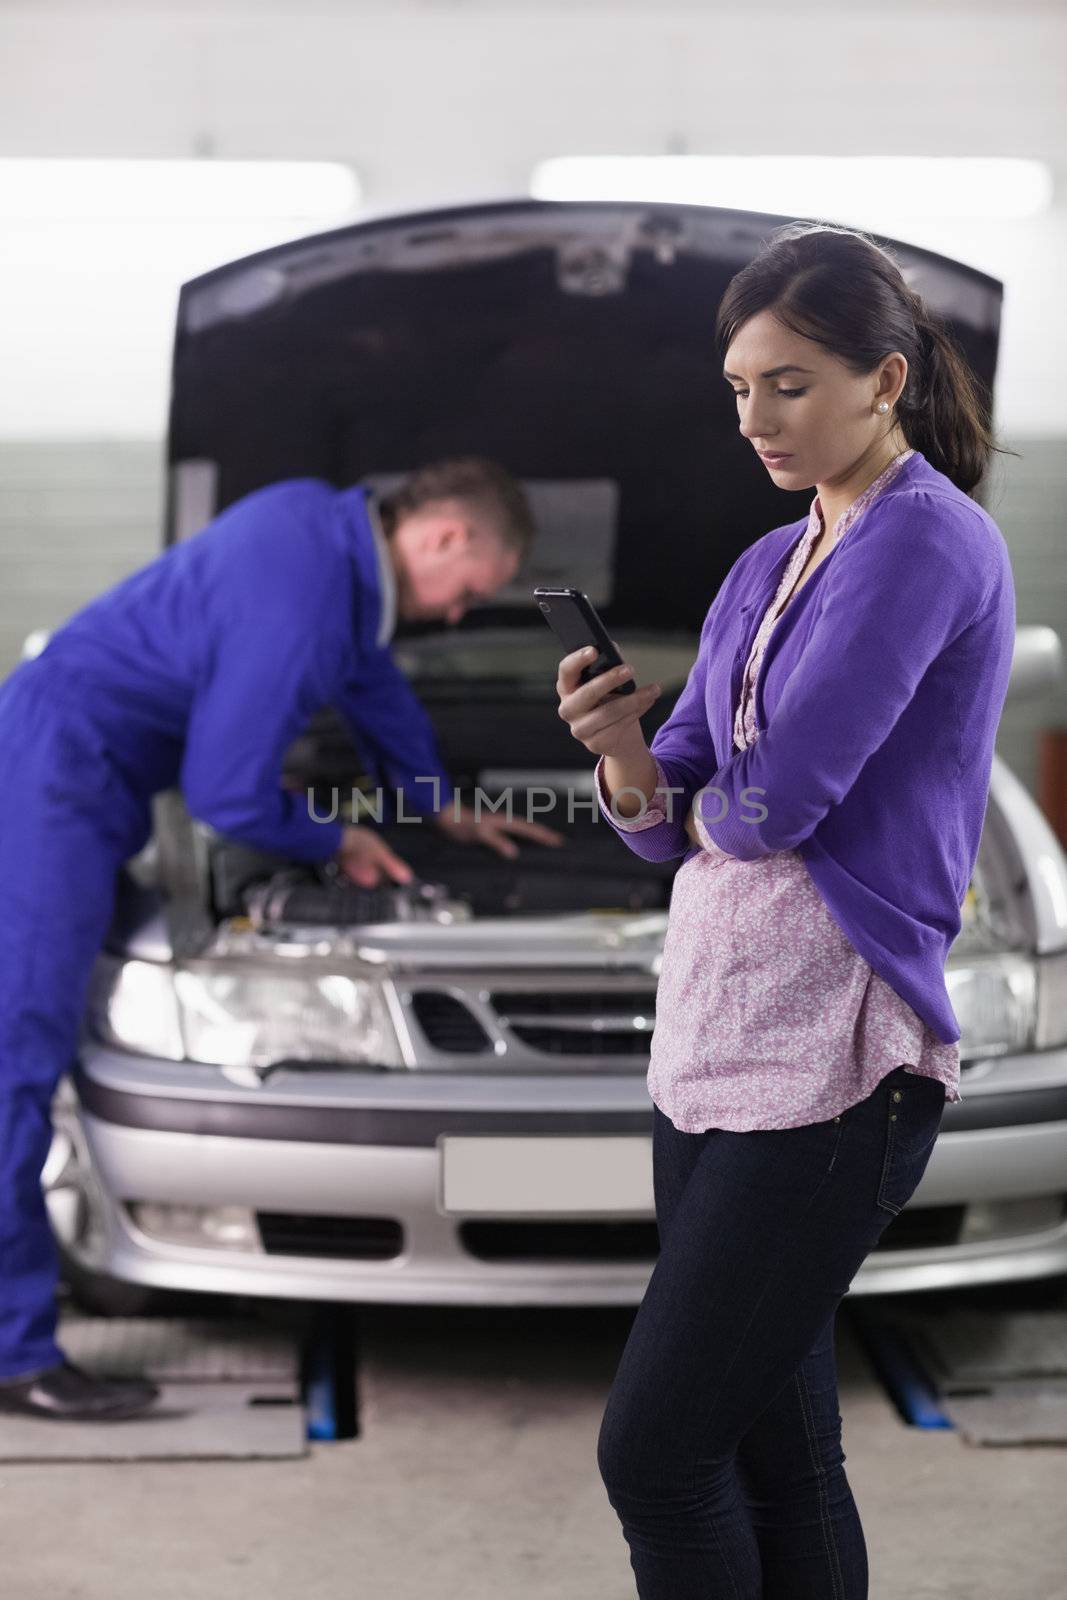 Woman looking a her mobile phone next to a mechanic in a garage